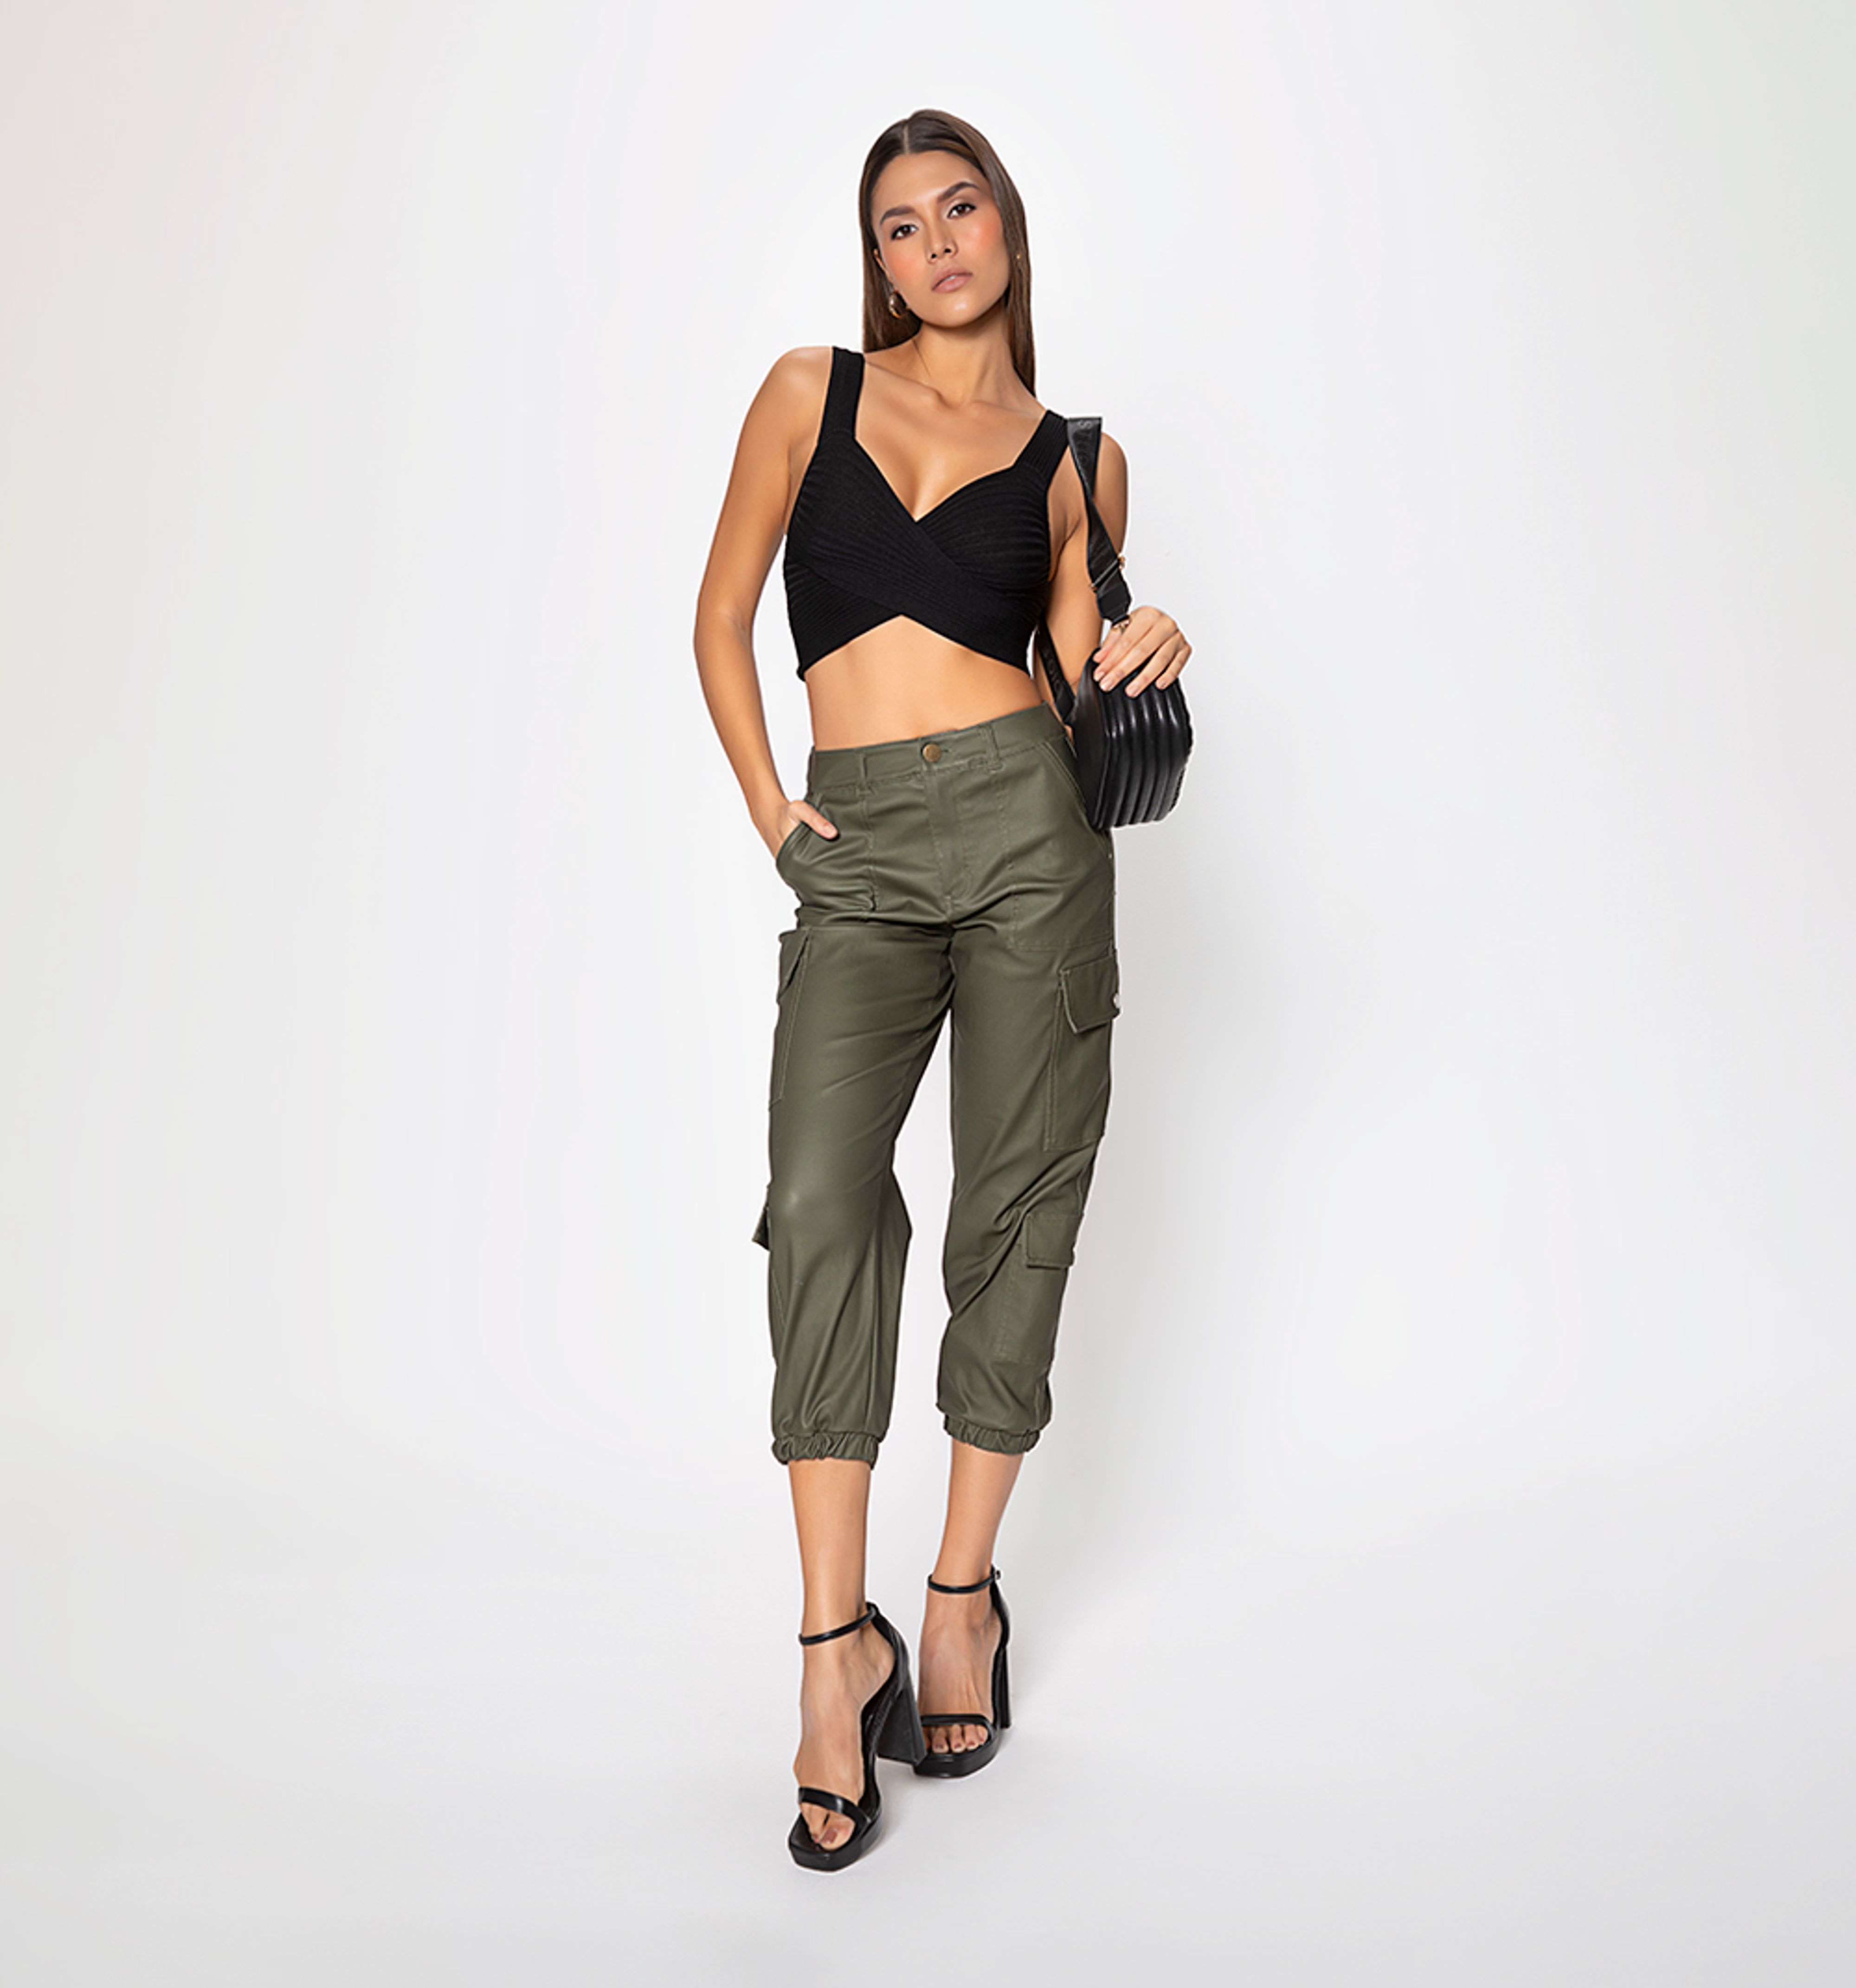 -stfco-producto-Newfits-VERDEMILITAR-S740290-1